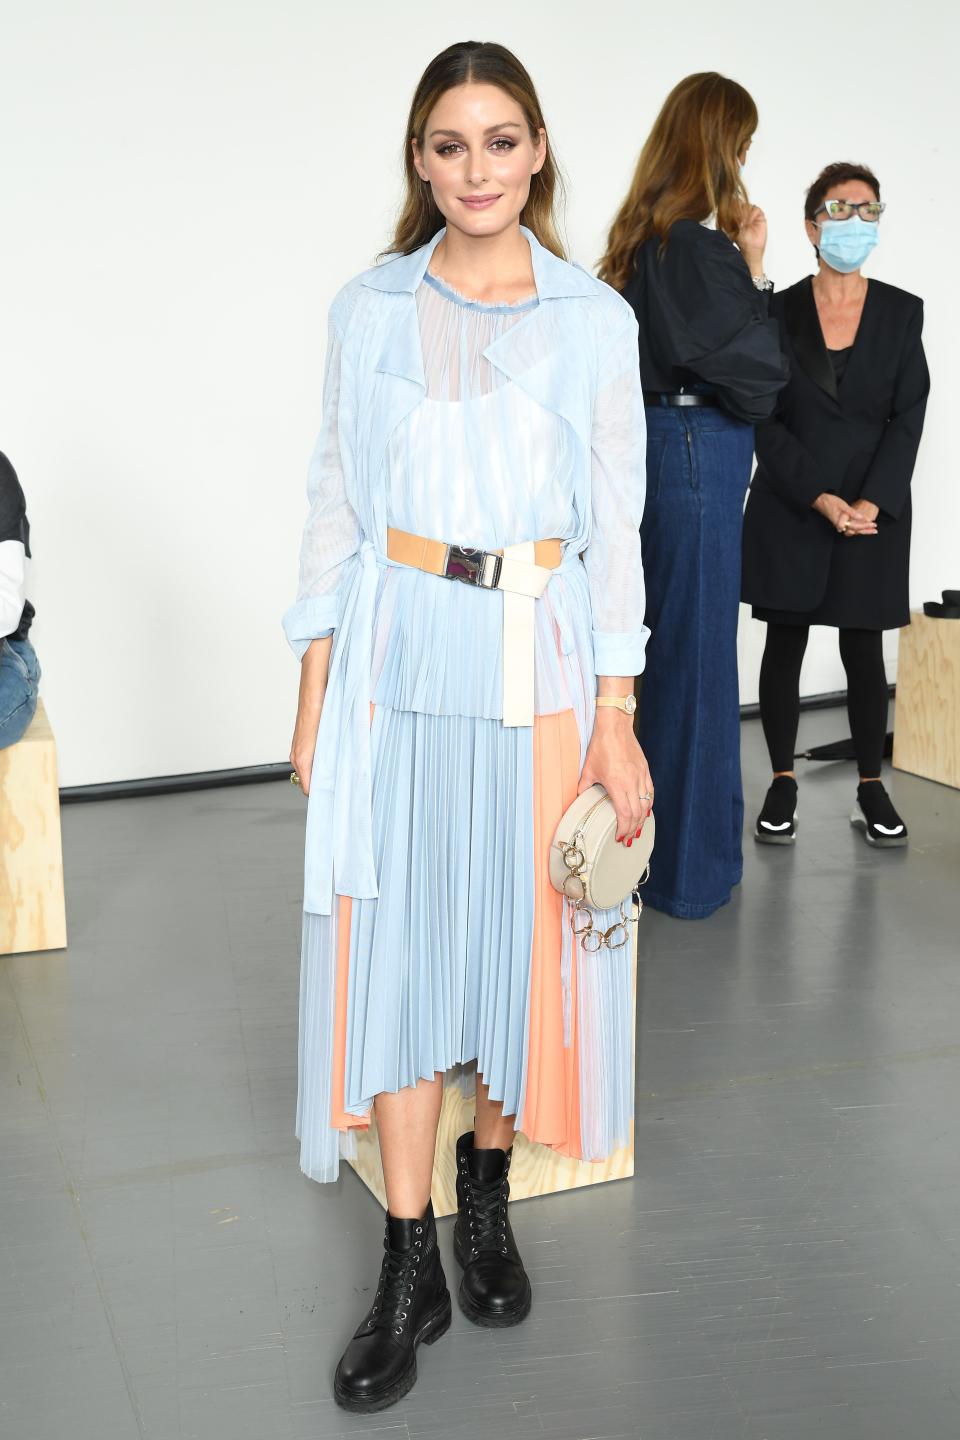 Olivia Palermo wearing a blue sheer top with a pleated skirt in a matching color with peach streaks, as well as a peach belt